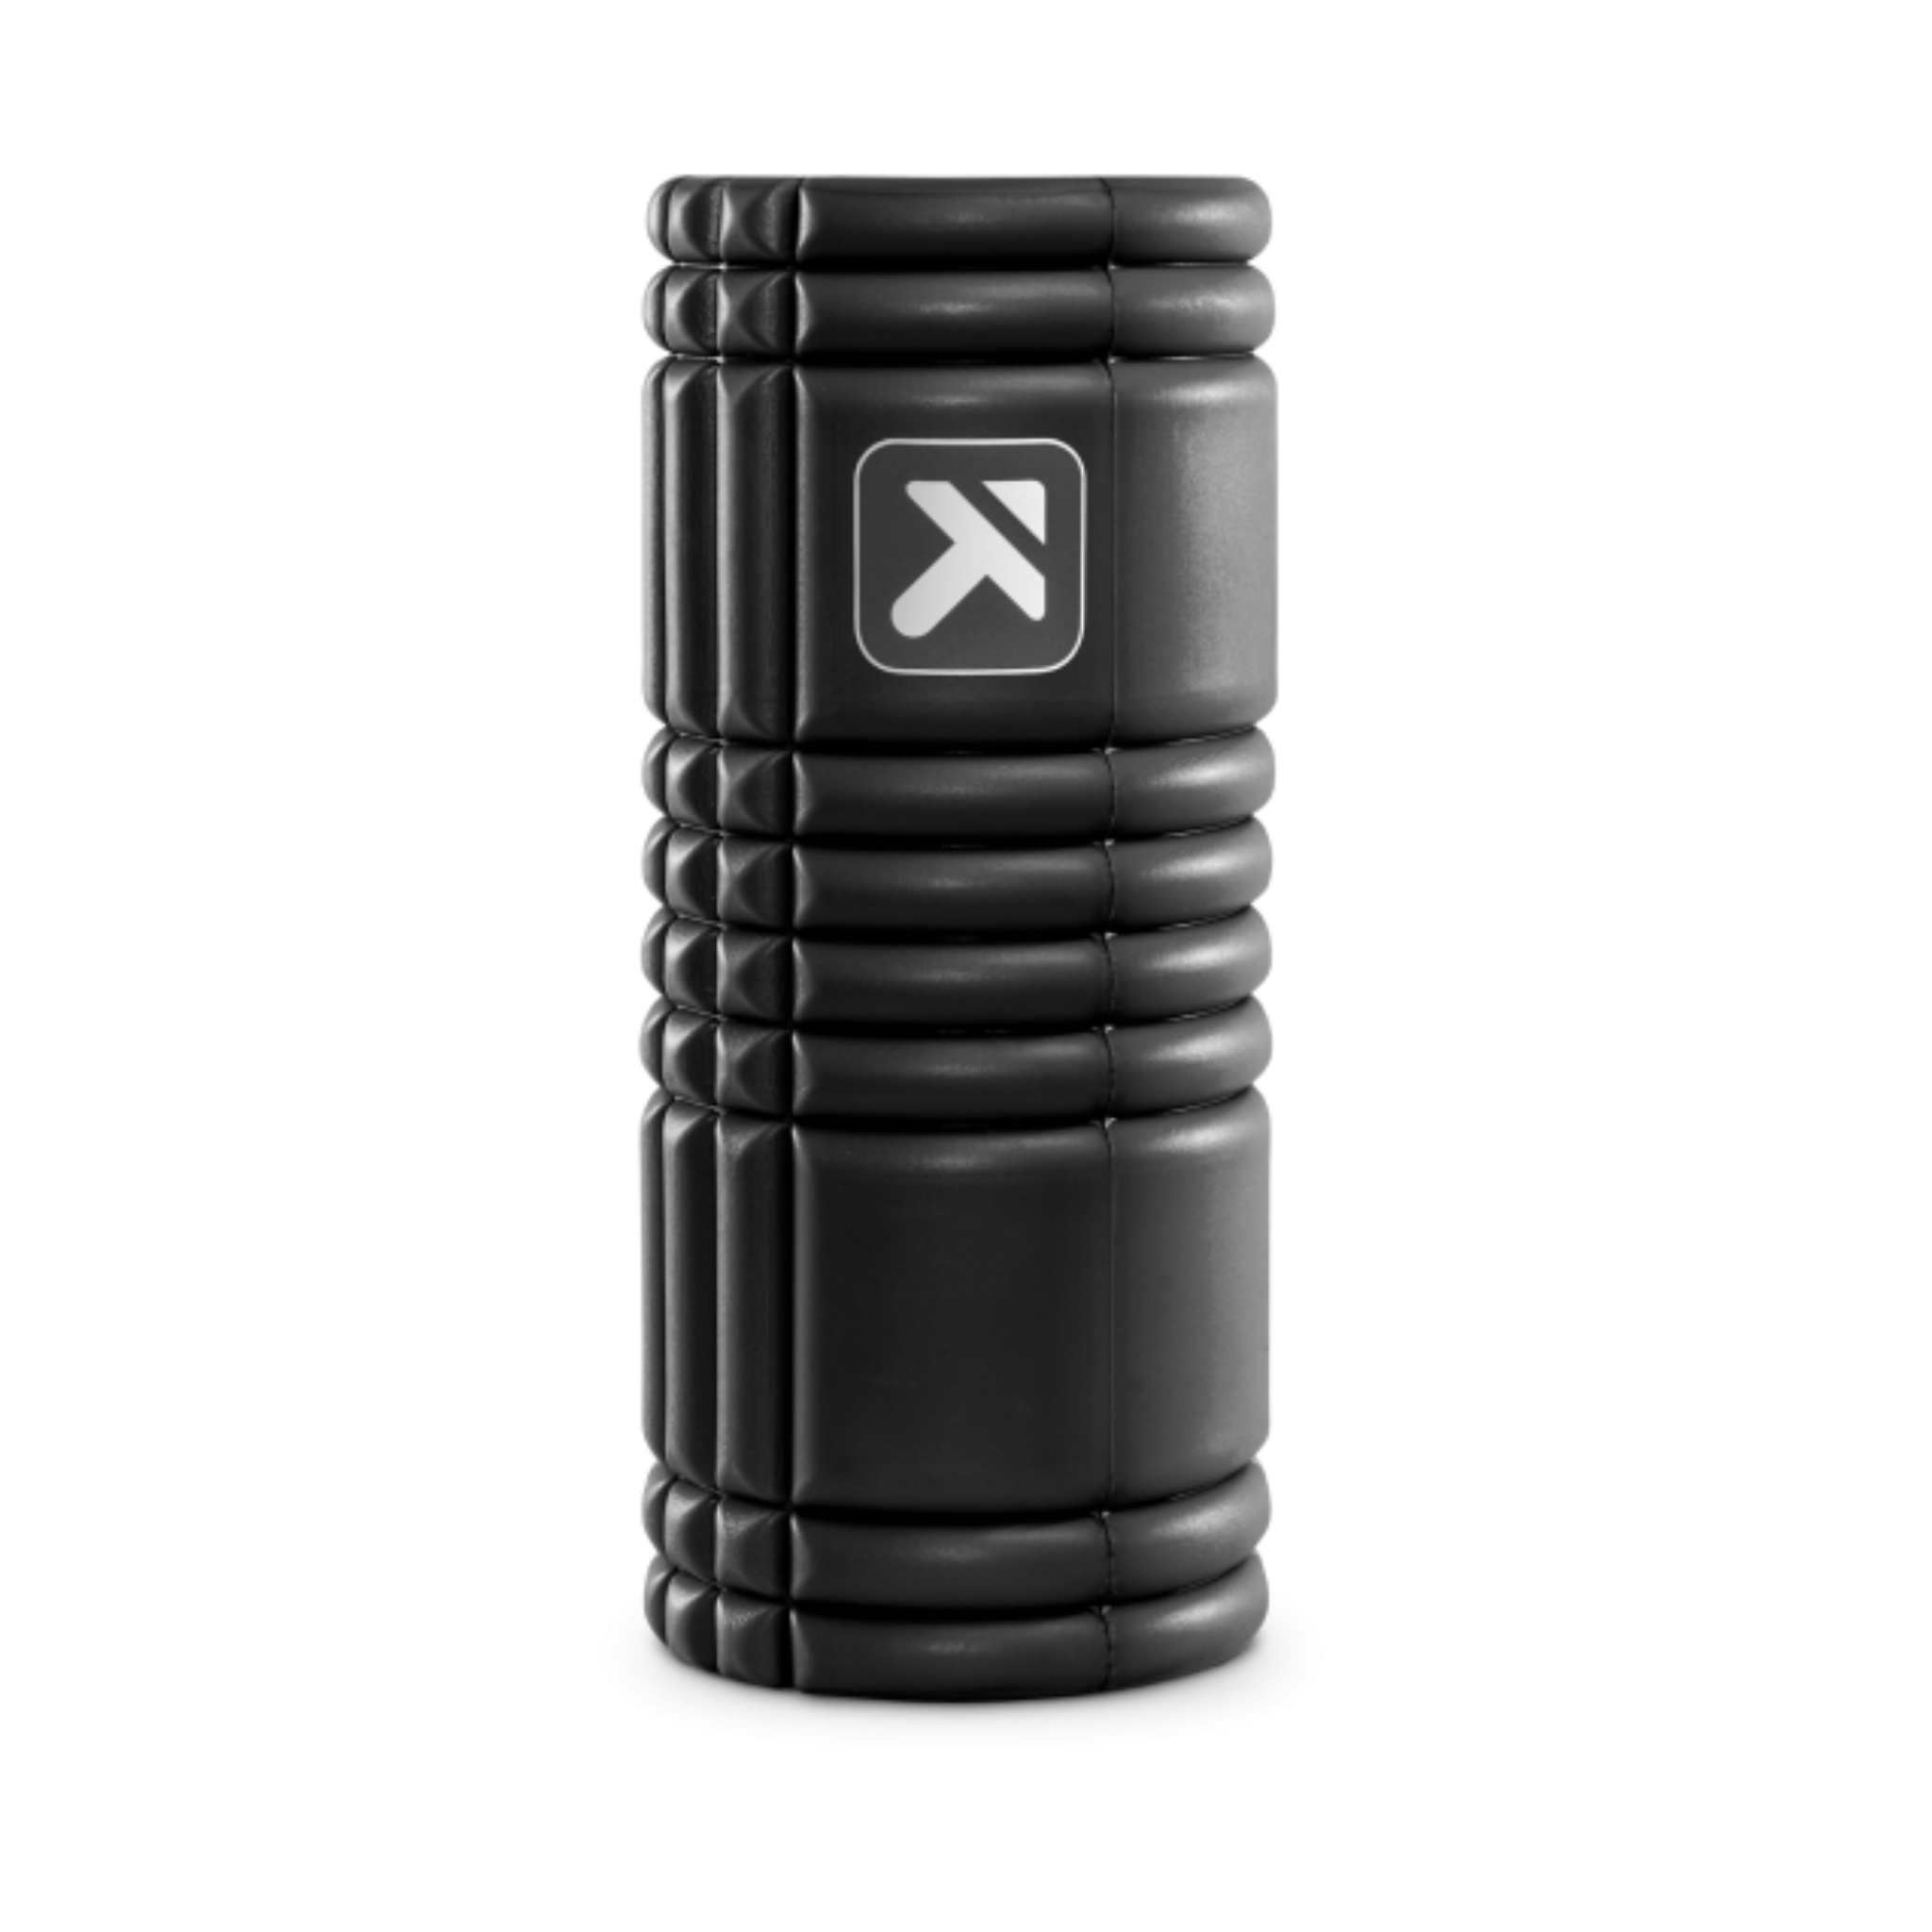 TRIGGER POINT TECHNOLOGIES THE GRID FOAM ROLLER MIDNIGHT